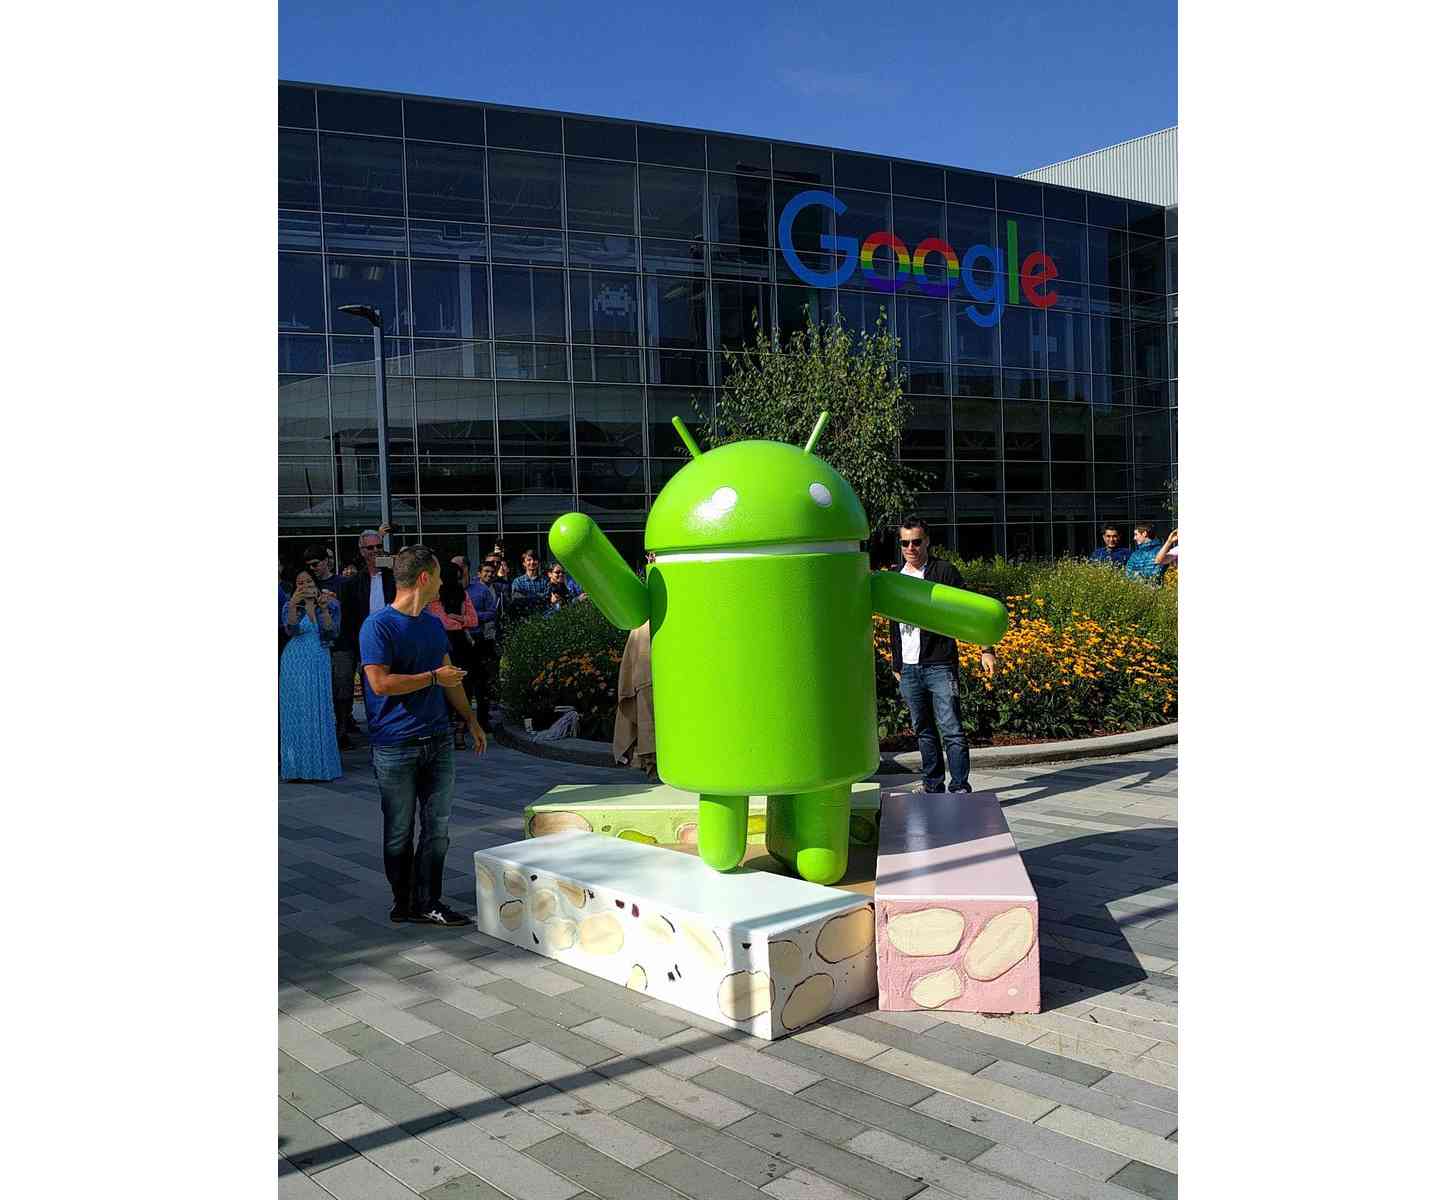 Android 7.0 Nougat statue